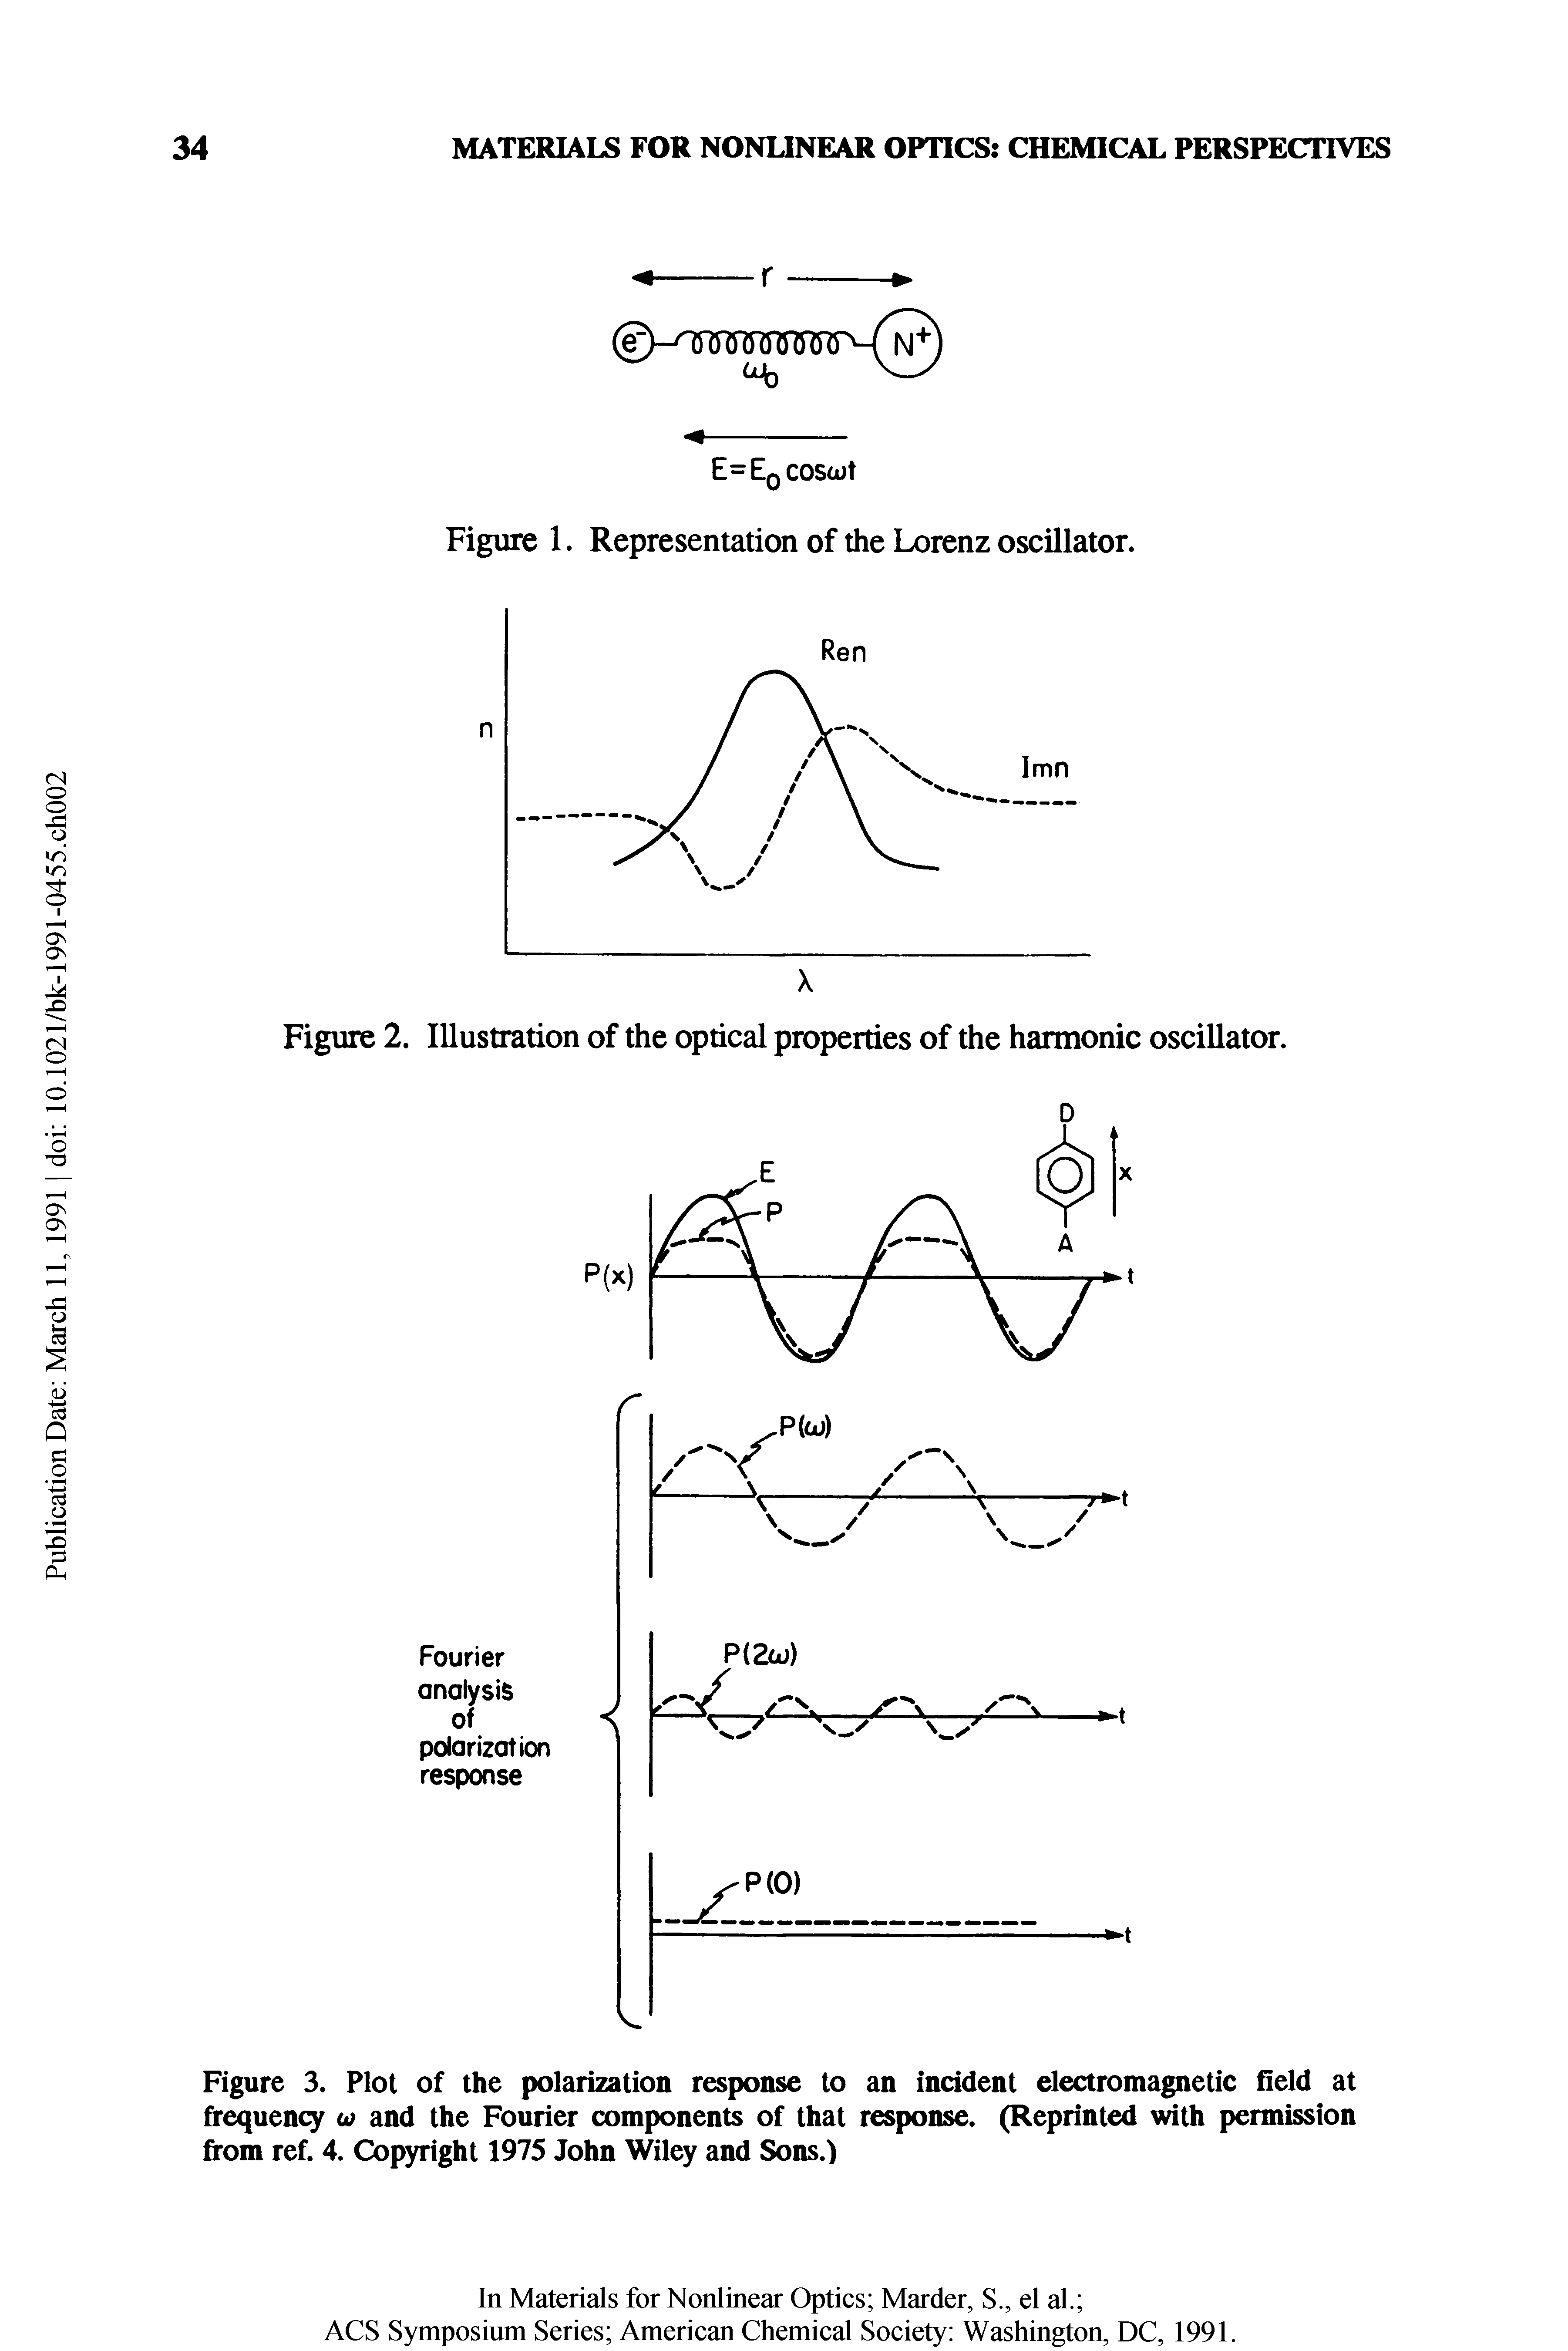 Figure 3. Plot of the polarization response to an incident electromagnetic field at frequency w and the Fourier components of that response. (Reprinted with permission from ref. 4. Copyright 1975 John Wiley and Sons.)...